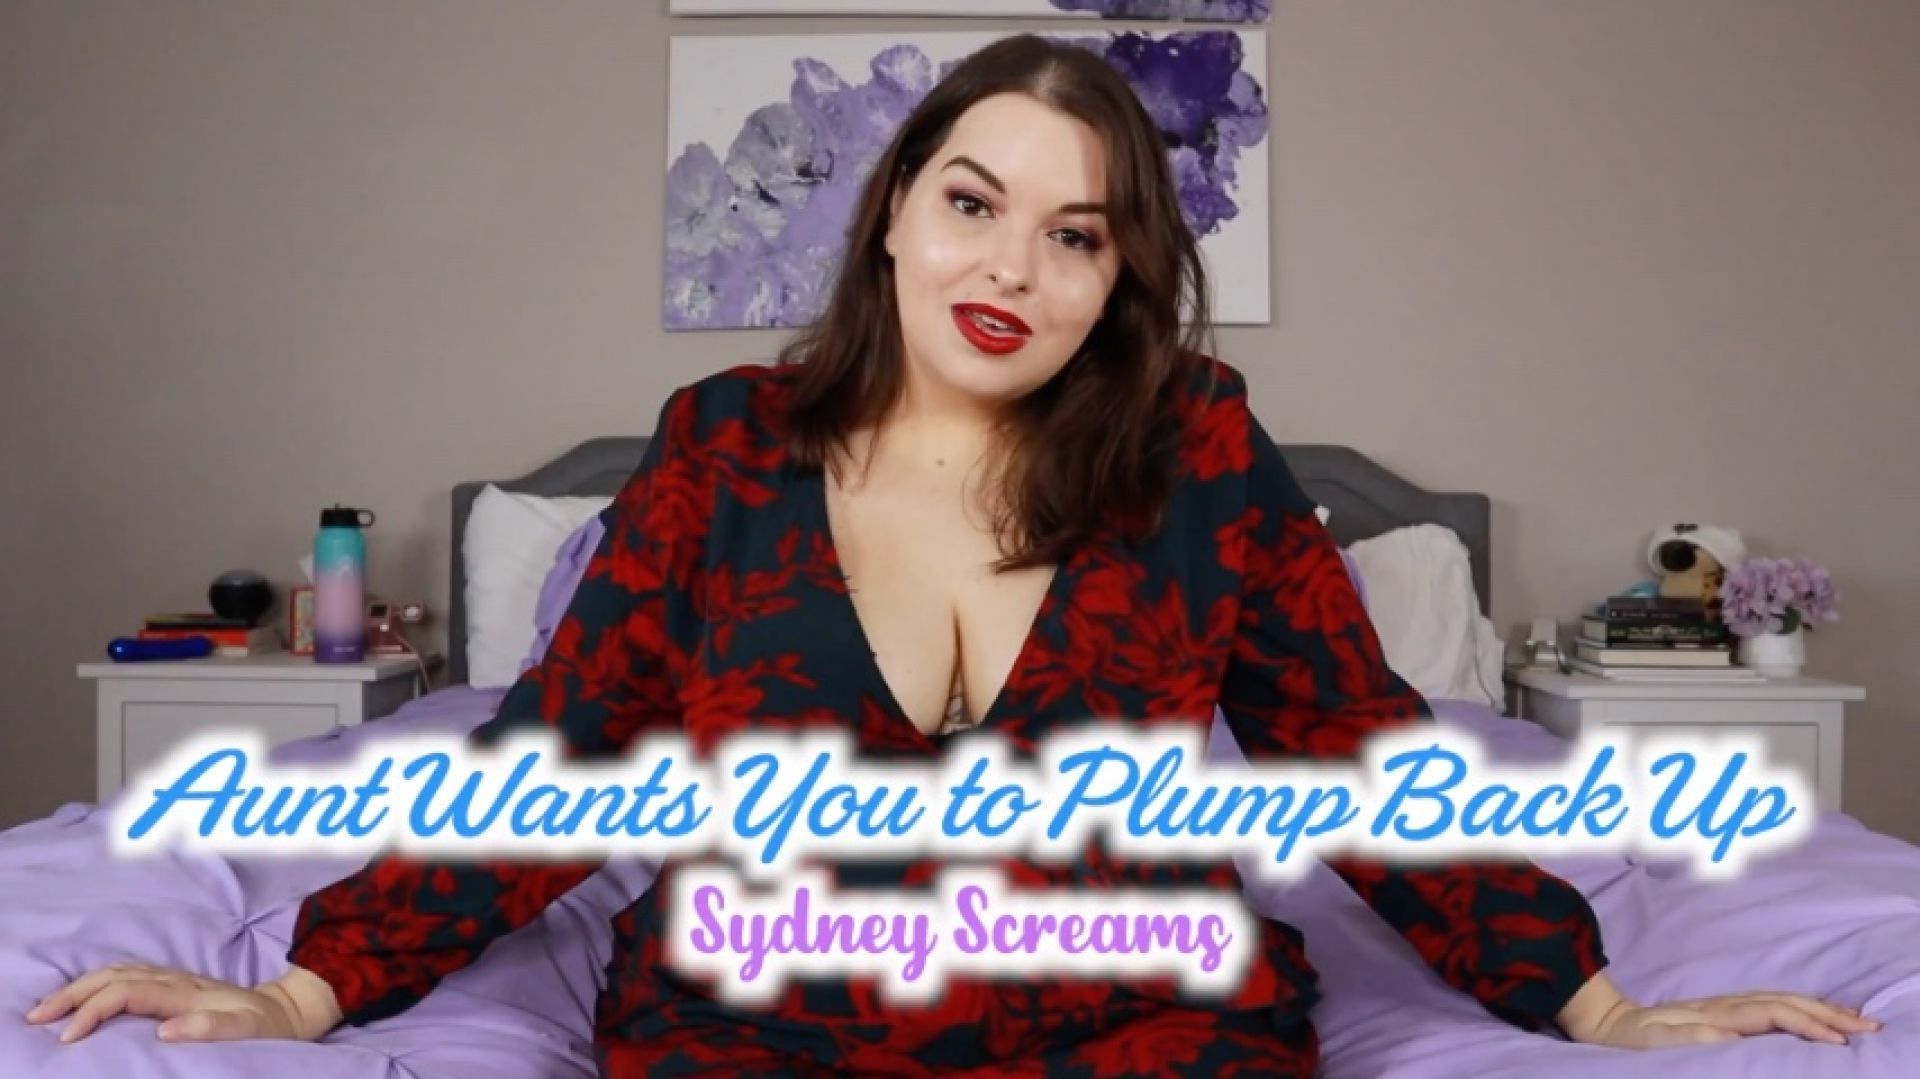 Aunt Wants You to Plump Back Up